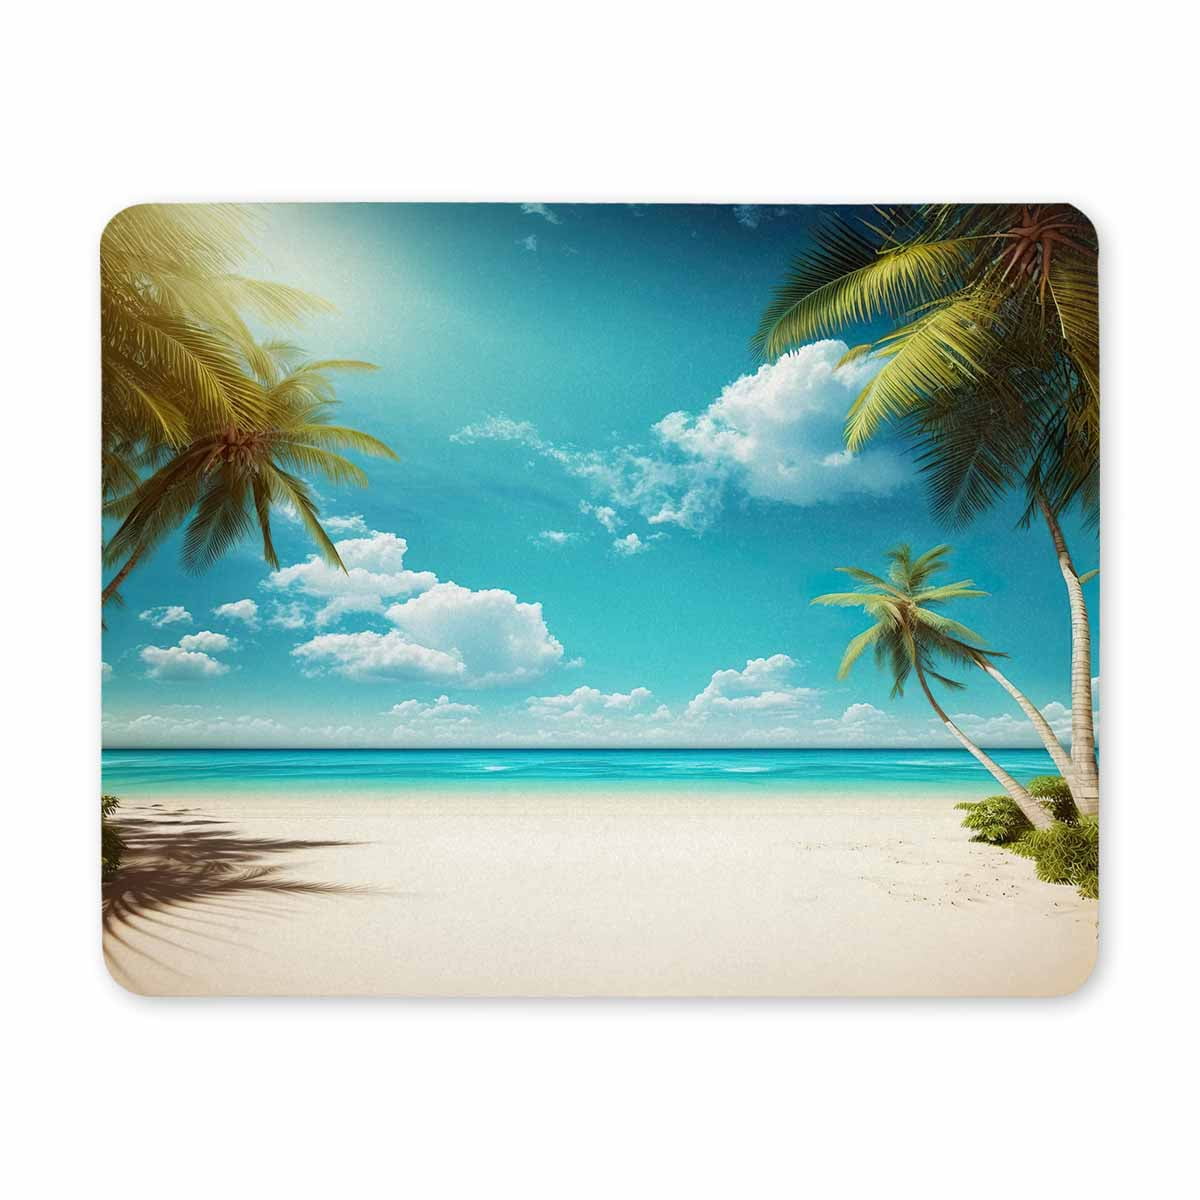 Square Mouse Pad, Tropical Beach Mouse Pad, Waterproof Anti-Slip Rubber ...